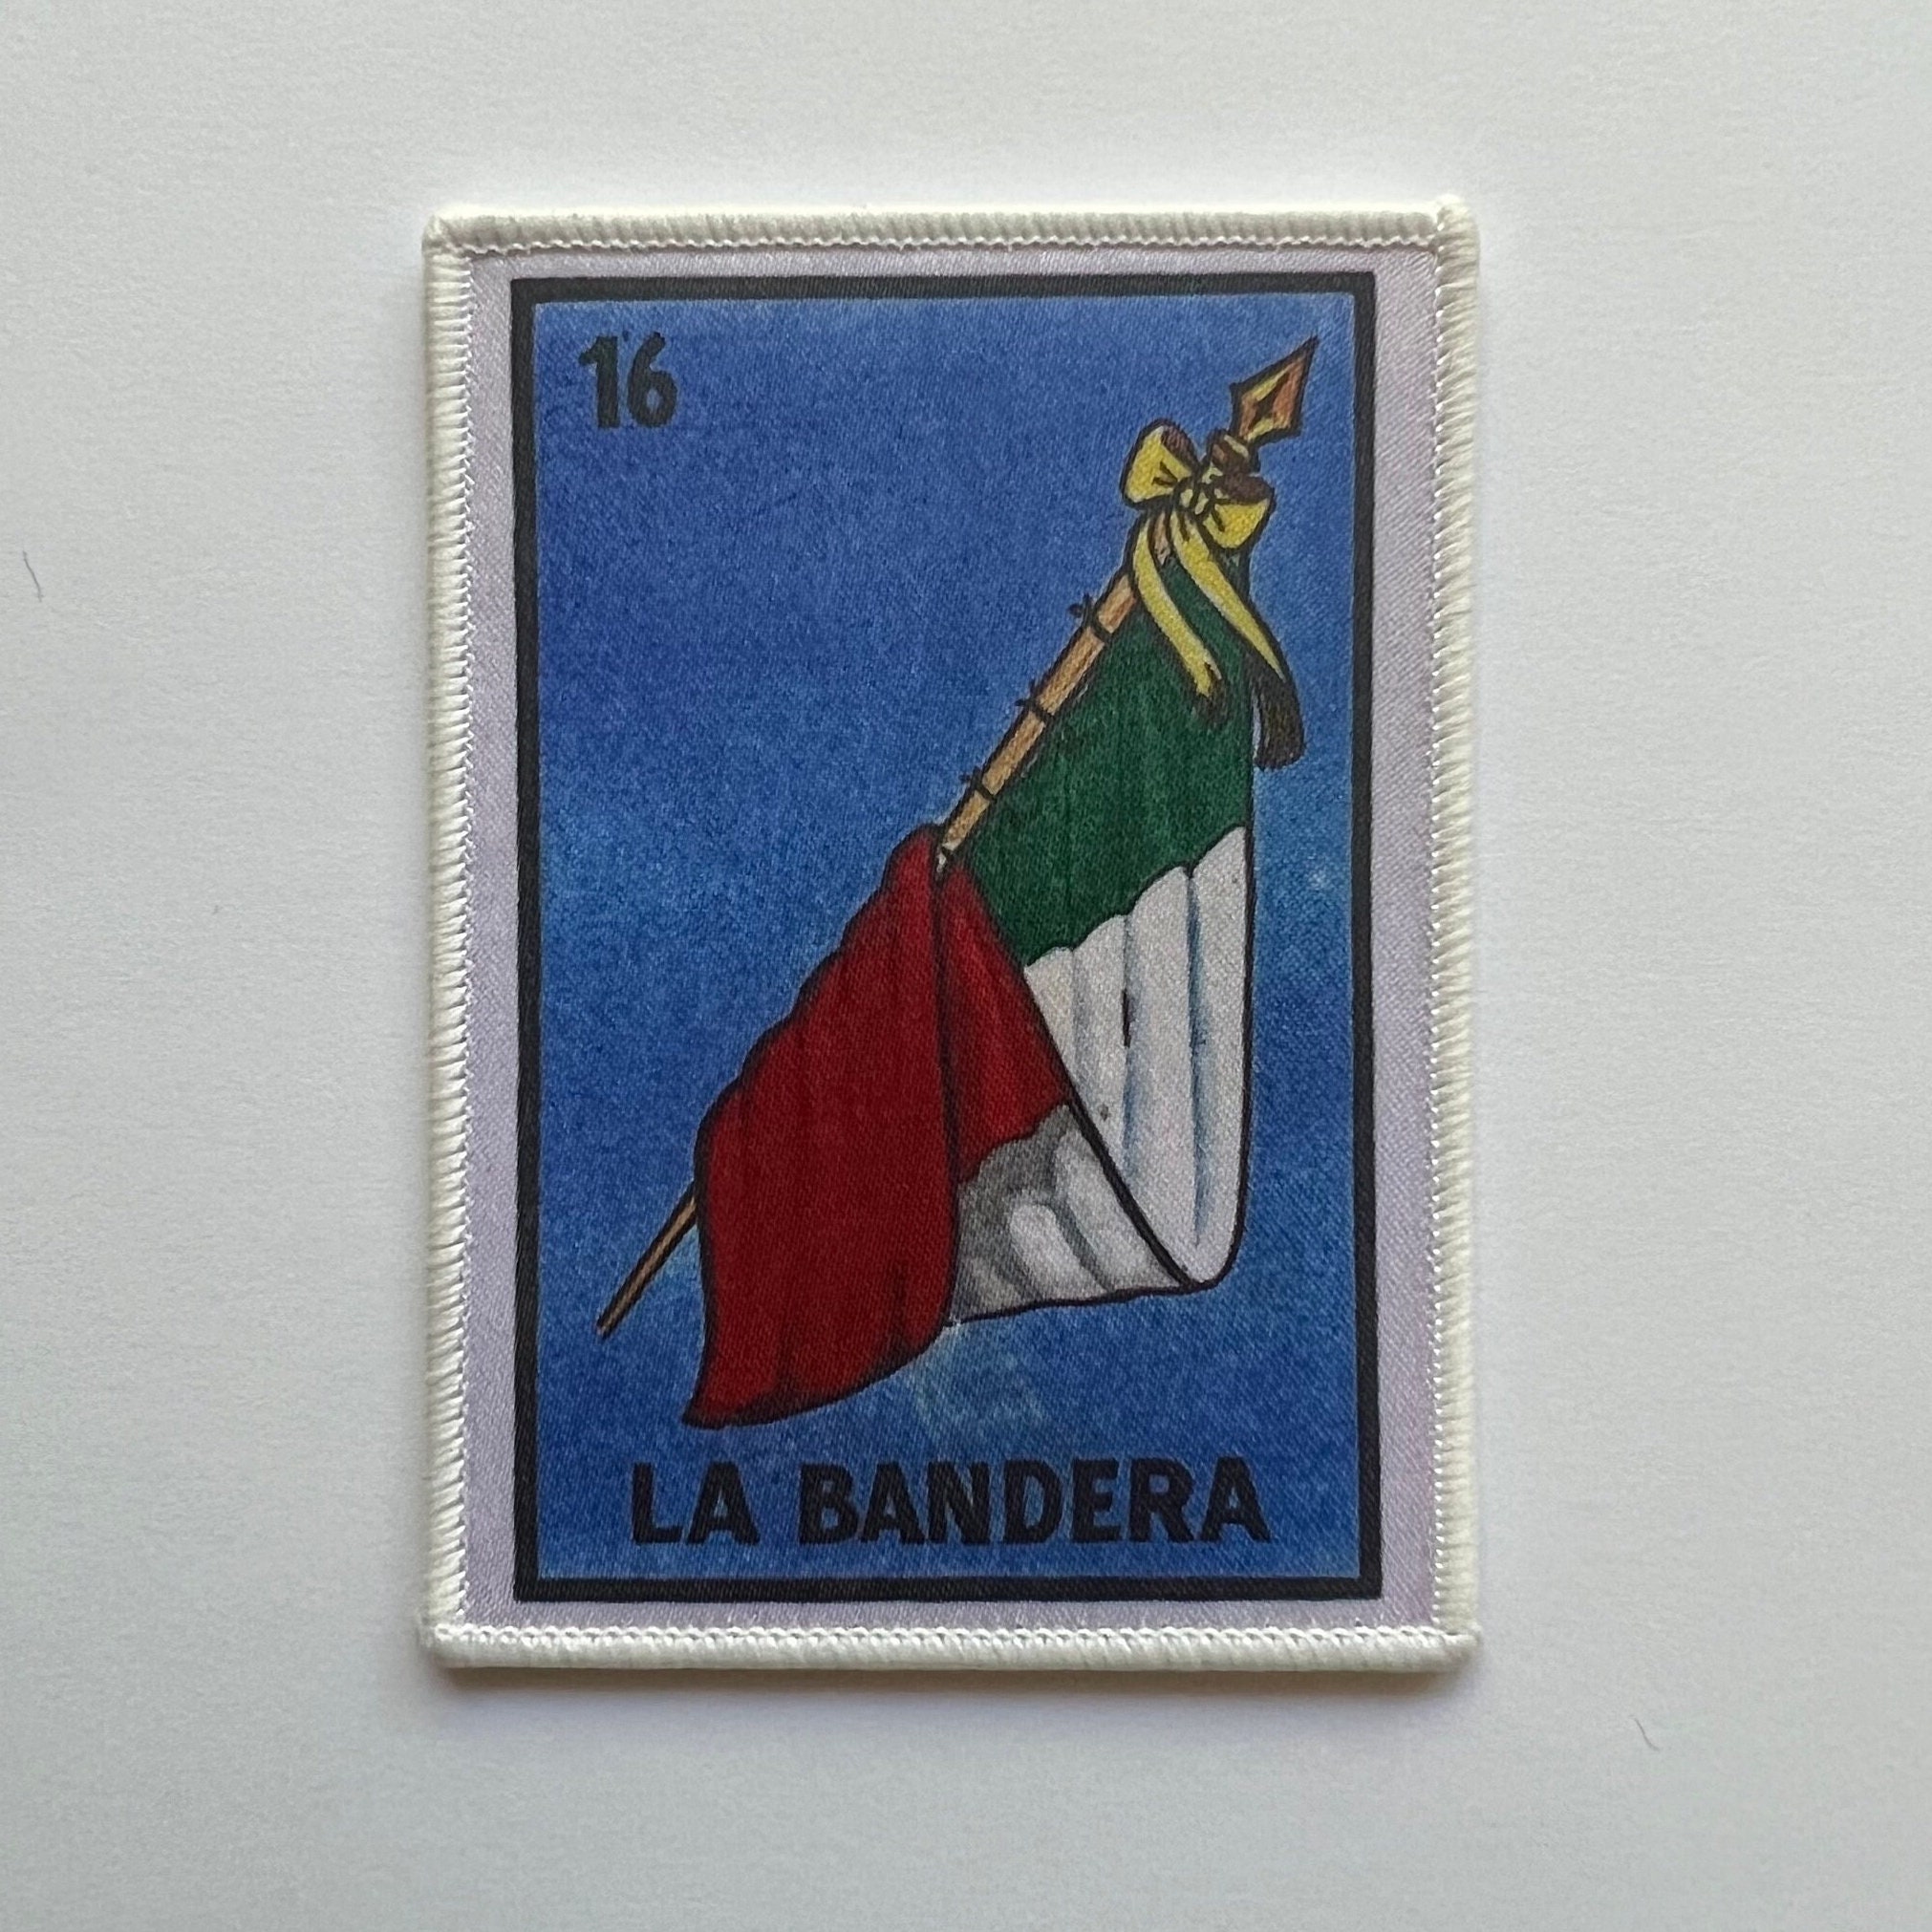 MEXICO mylar flag shield uniform or souvenir embroidered patch - 6492